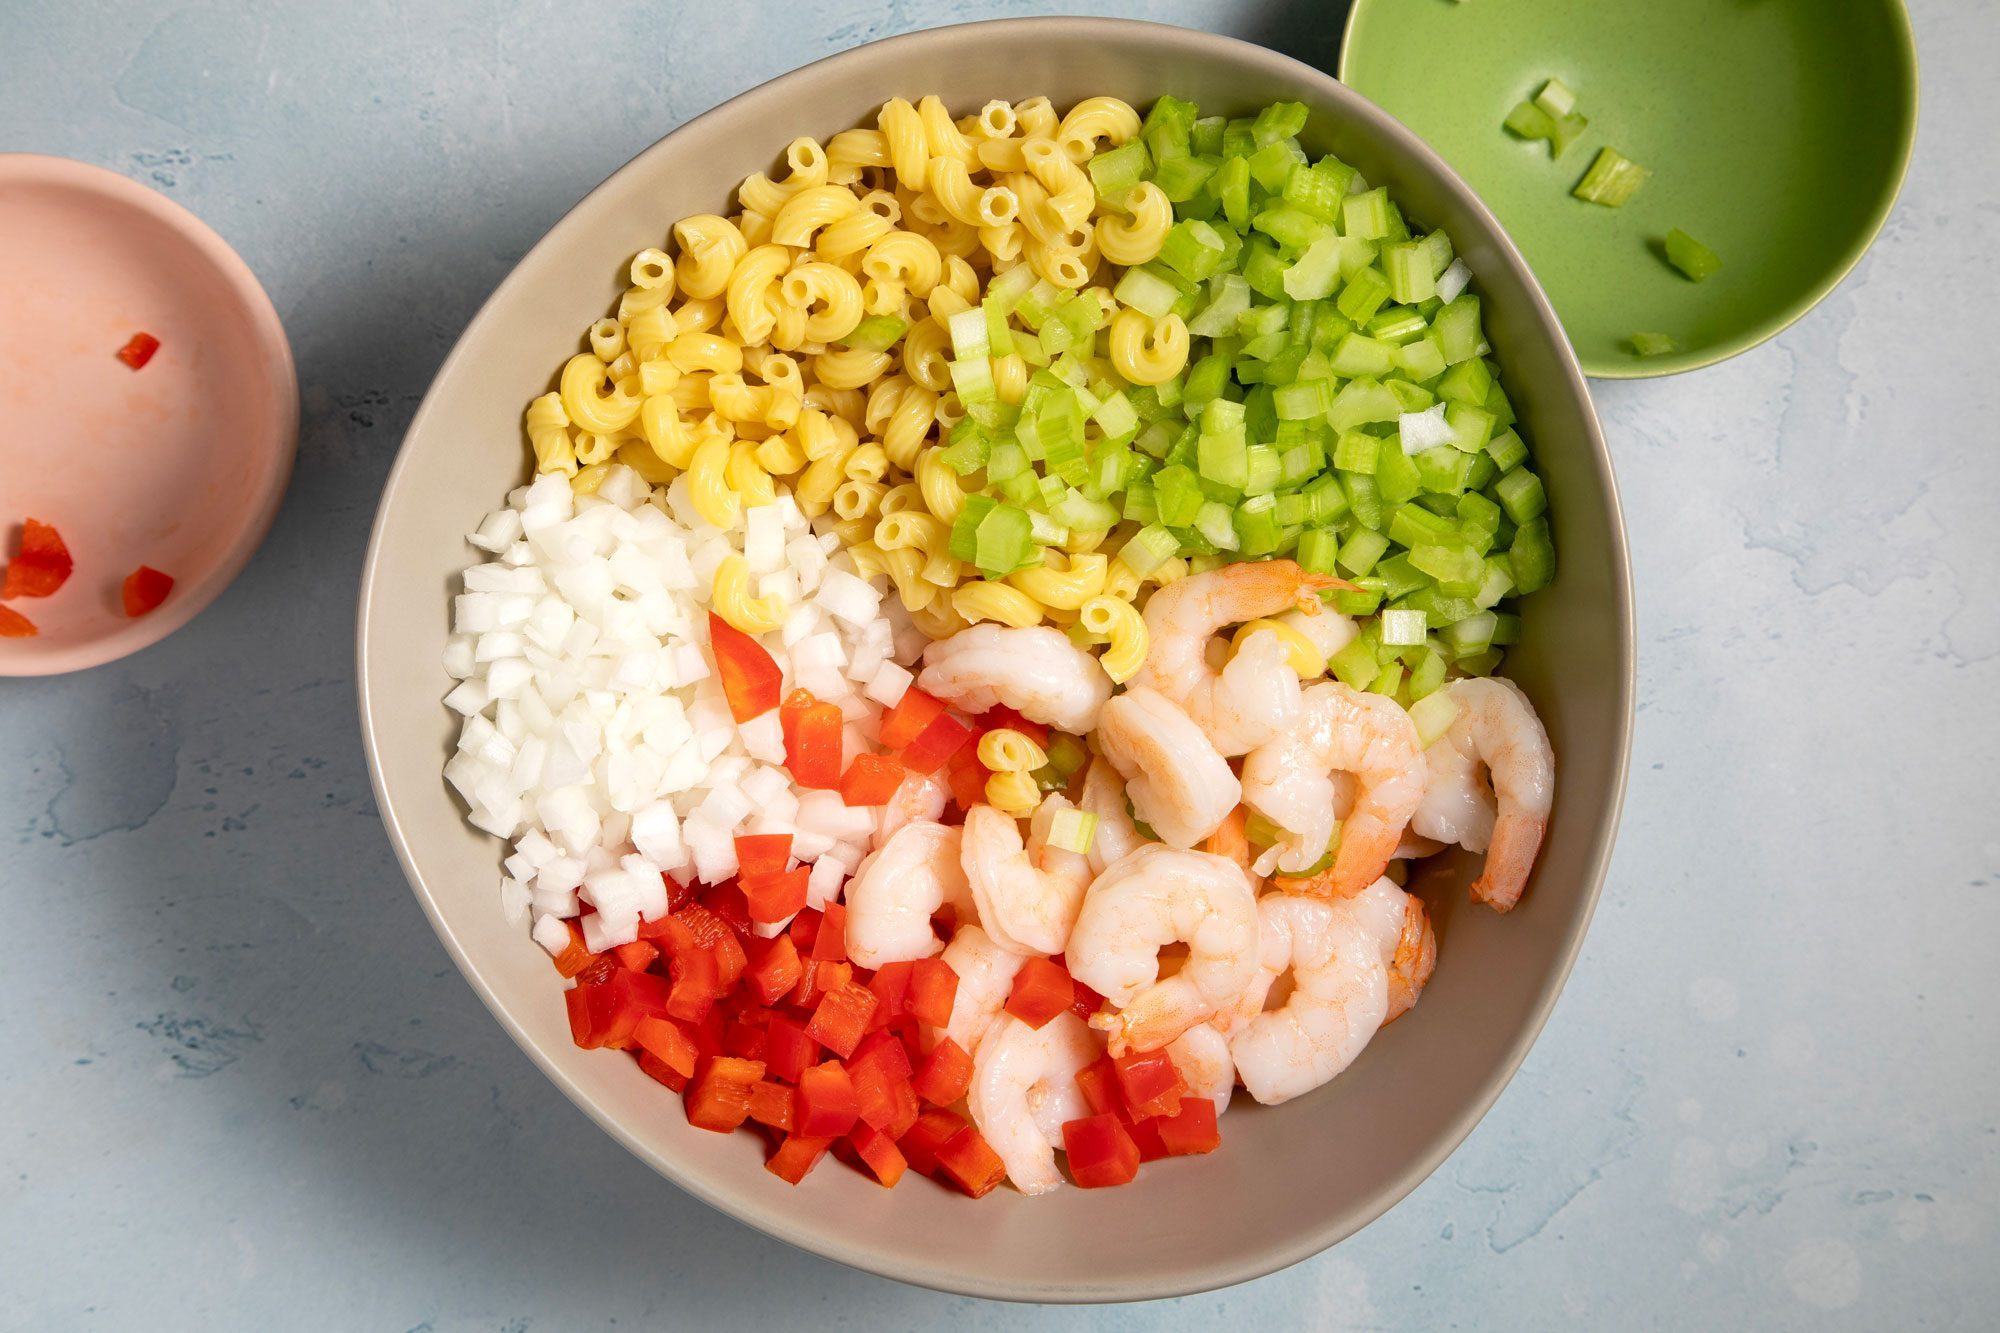 In a large bowl, combine the pasta, shrimp, celery, pepper and onion